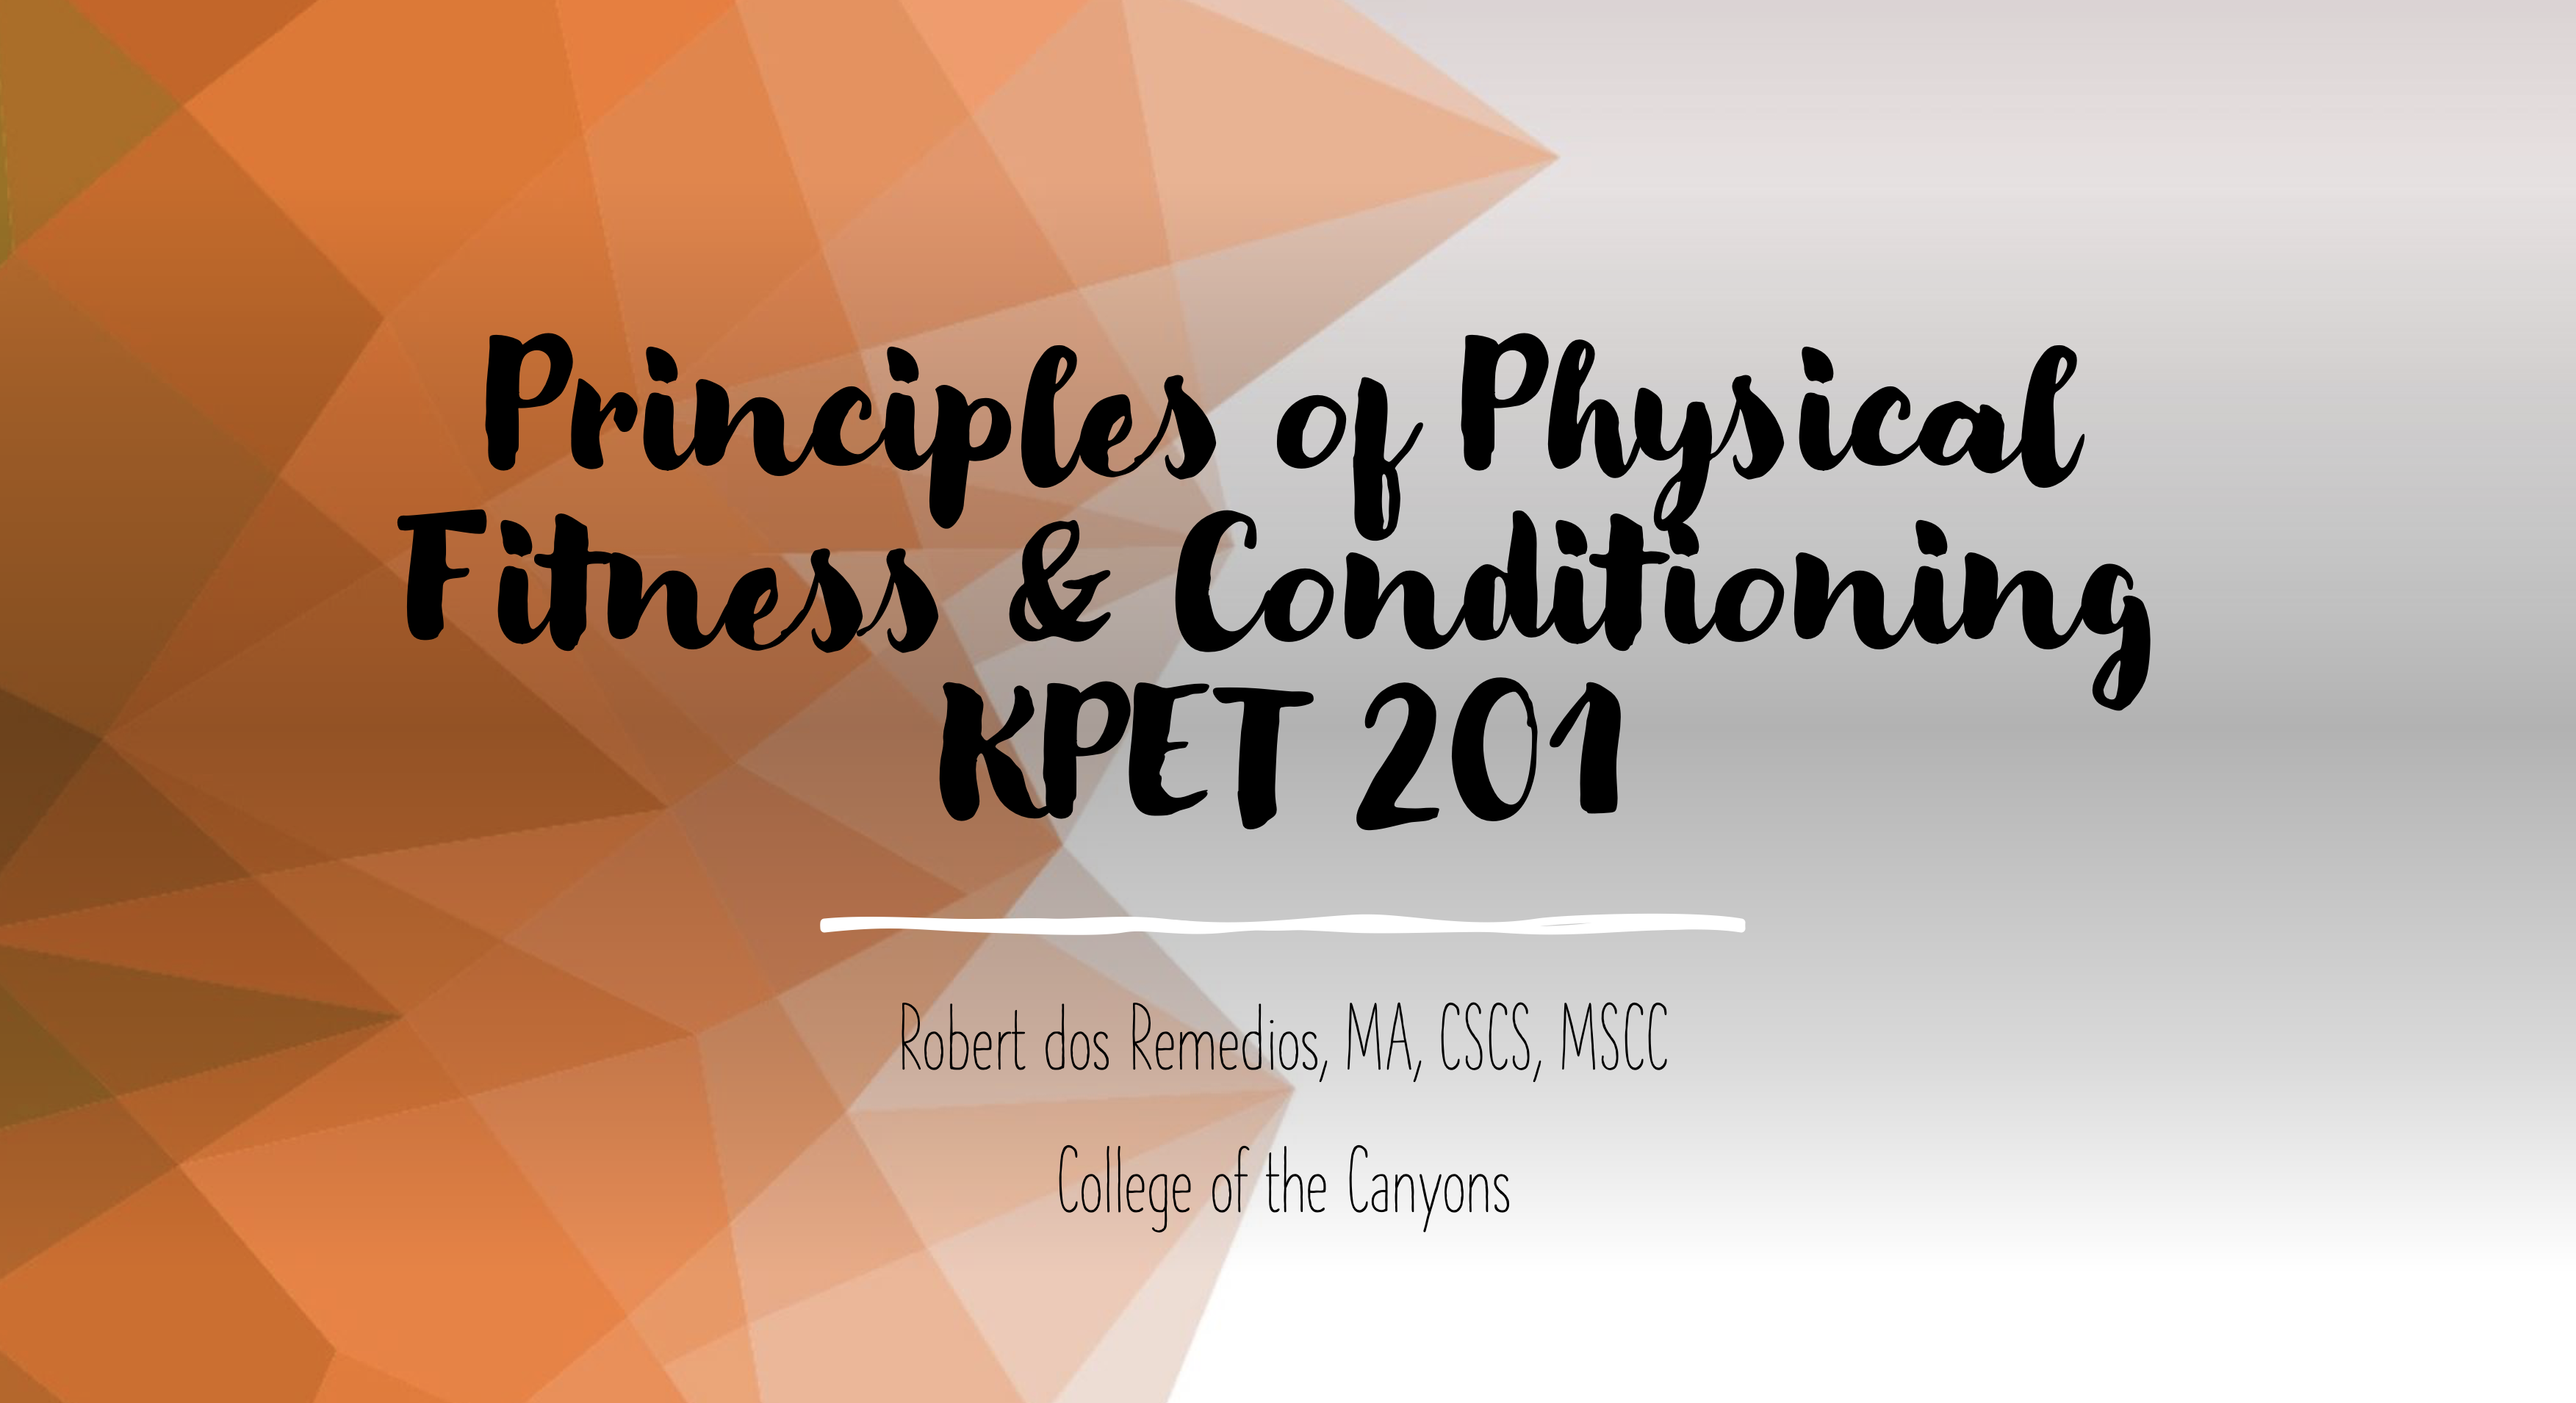 Principles of Physical Fitness and Conditioning KPET 201 Robert dos Remedios, MA, CSCS, MSCC, College of the Canyons